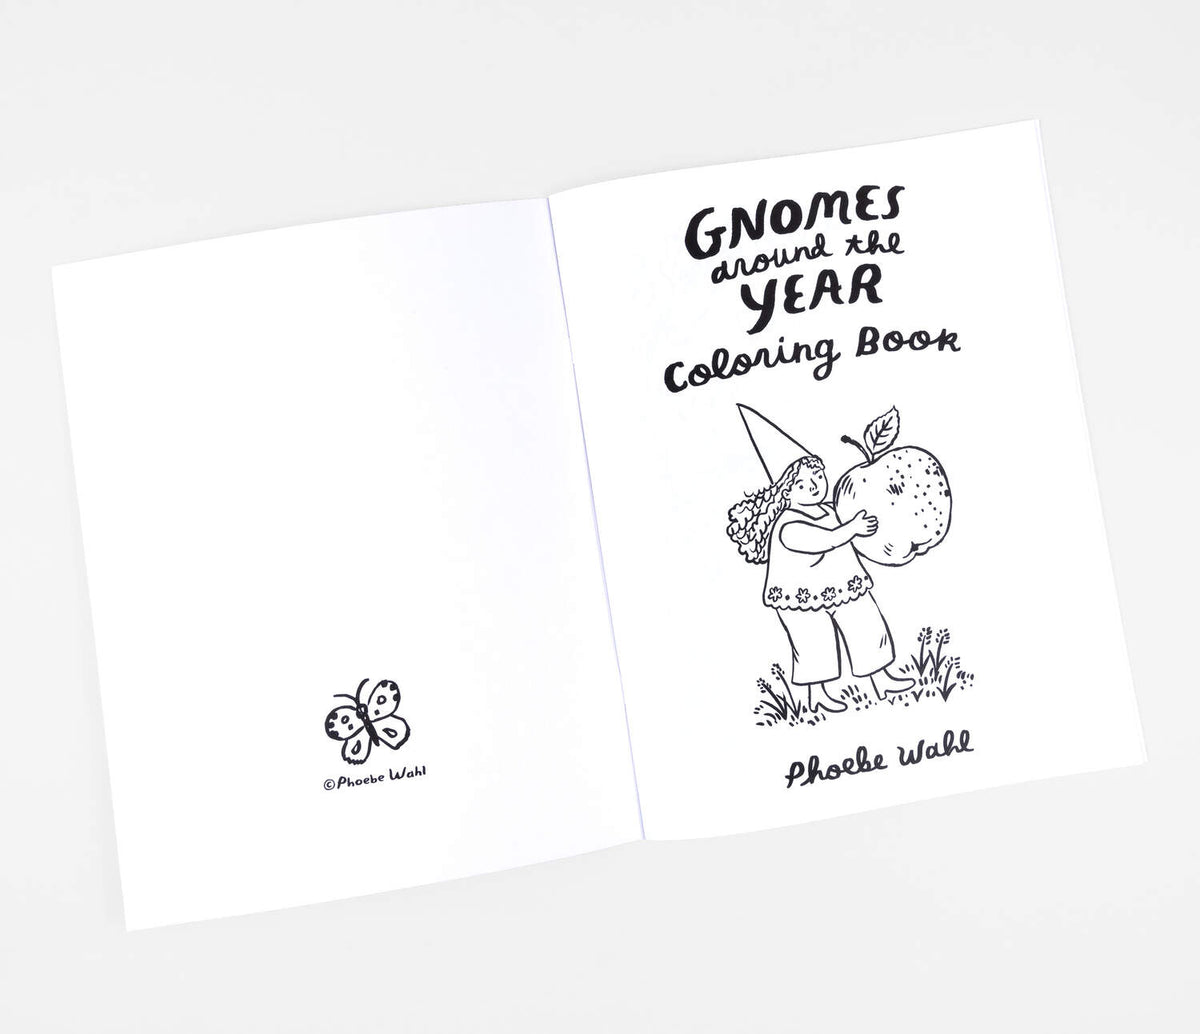 Gnomes Around the Year Colouring Book by Phoebe Wahl - Maude Kids Decor